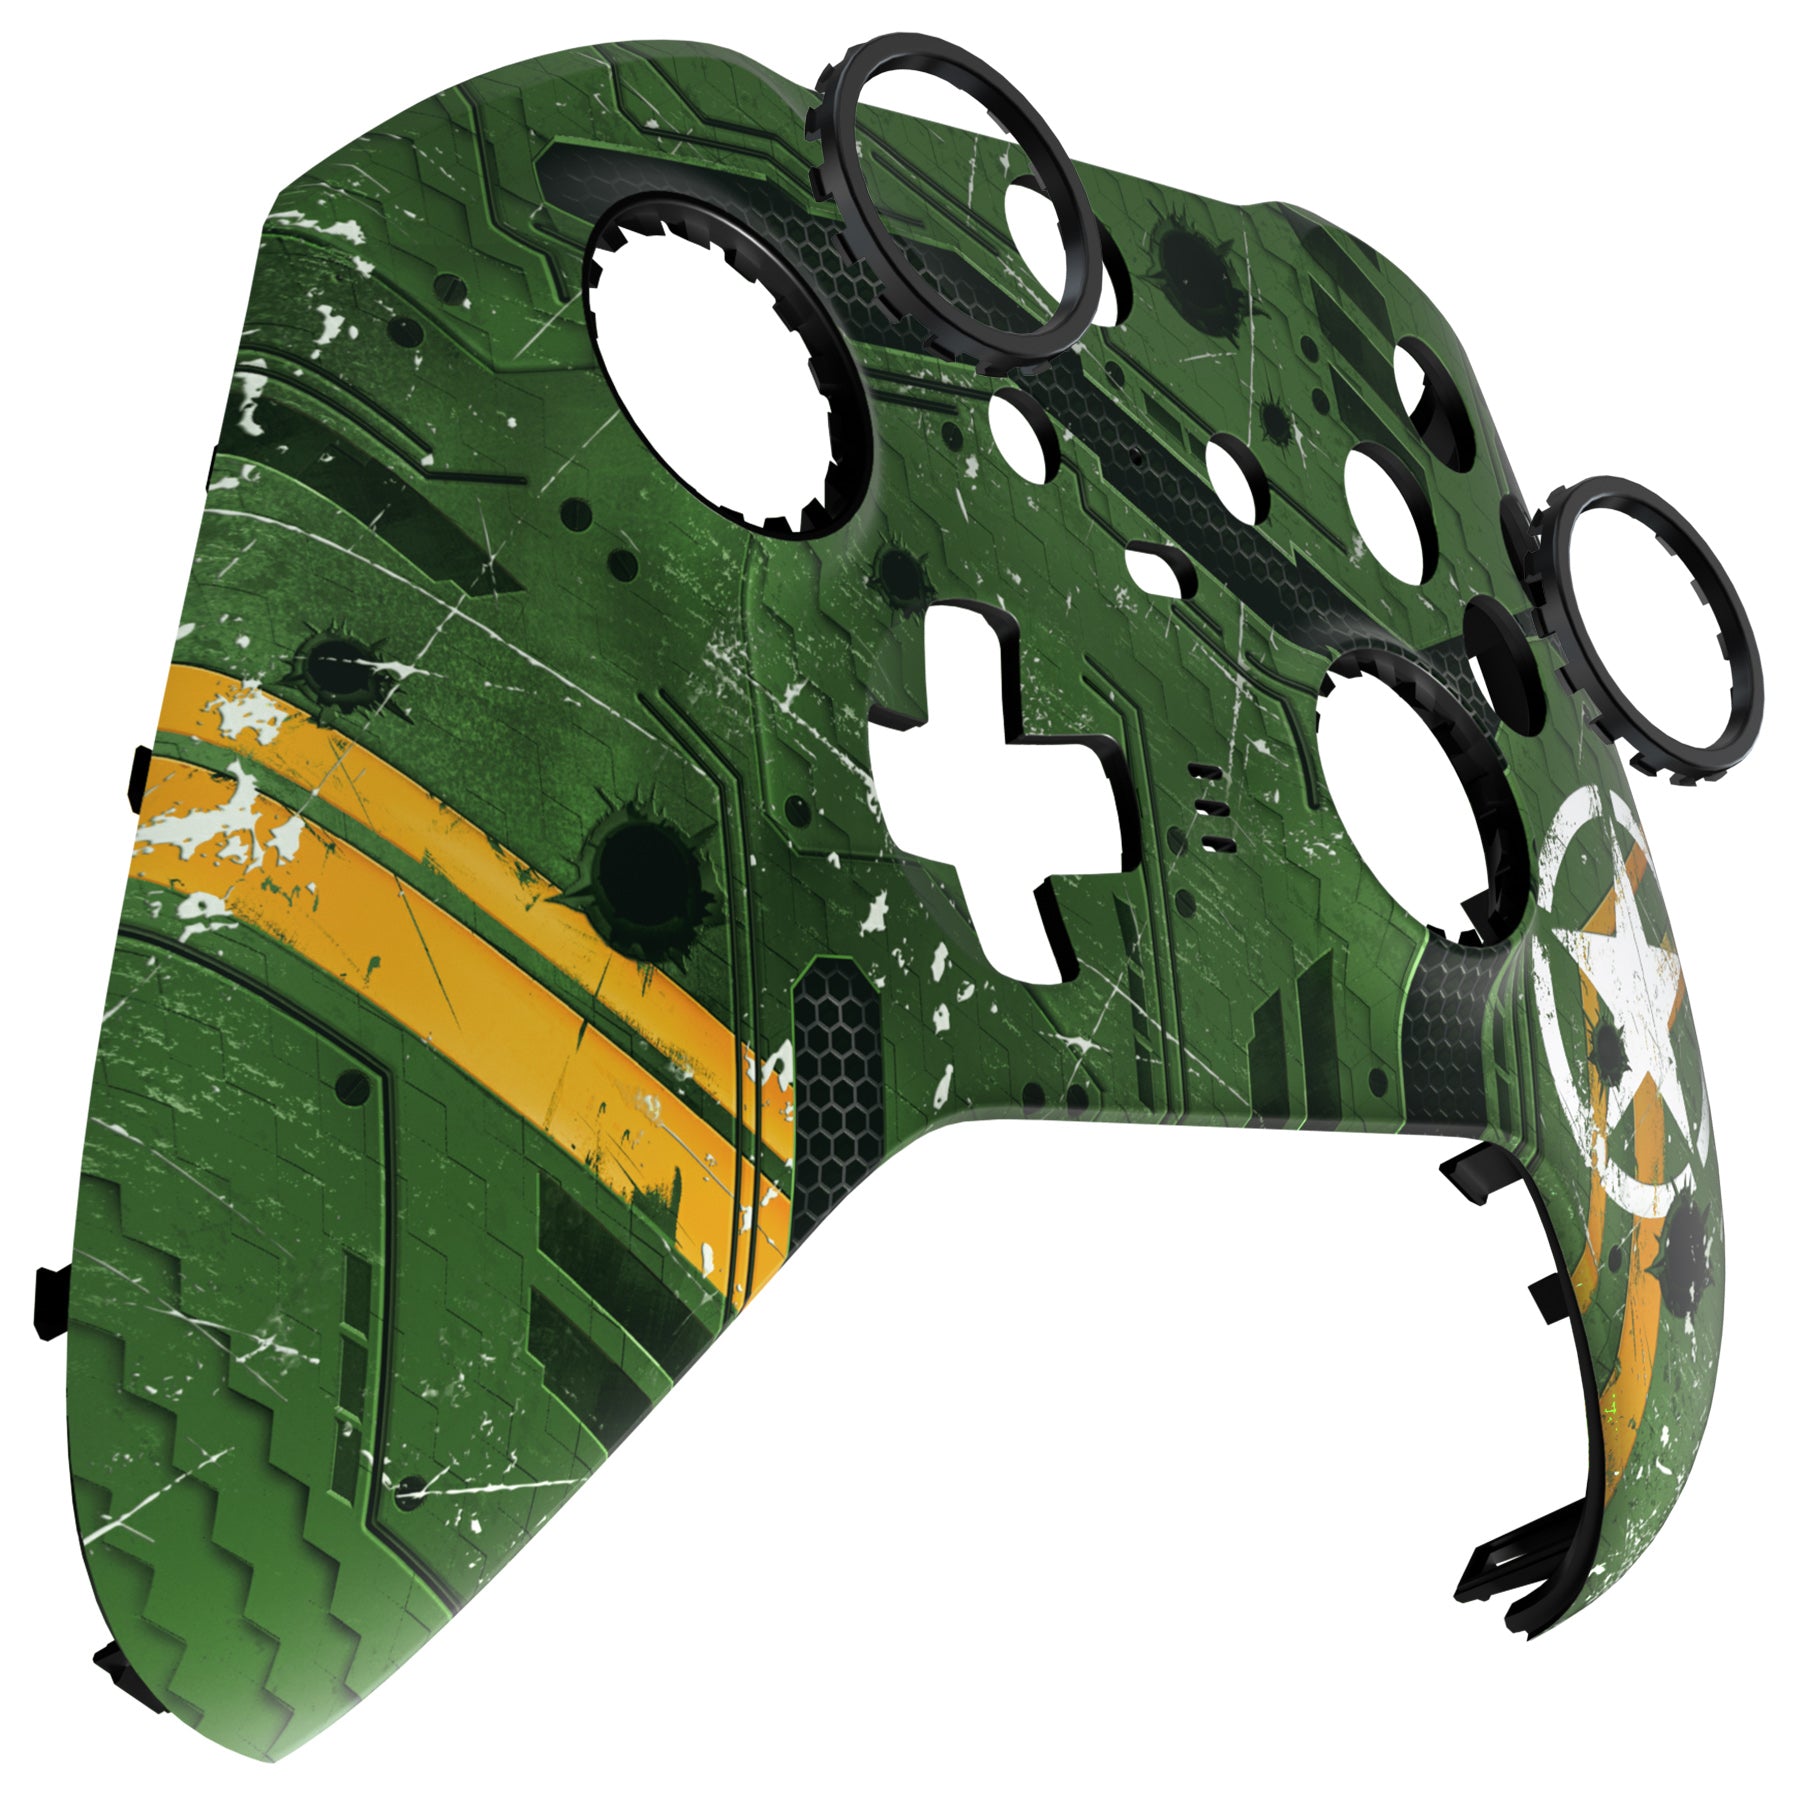 eXtremeRate Retail Army Mecha Faceplate Cover, Soft Touch Front Housing Shell Case Replacement Kit for Xbox One Elite Series 2 Controller Model 1797 - Thumbstick Accent Rings Included - ELT152